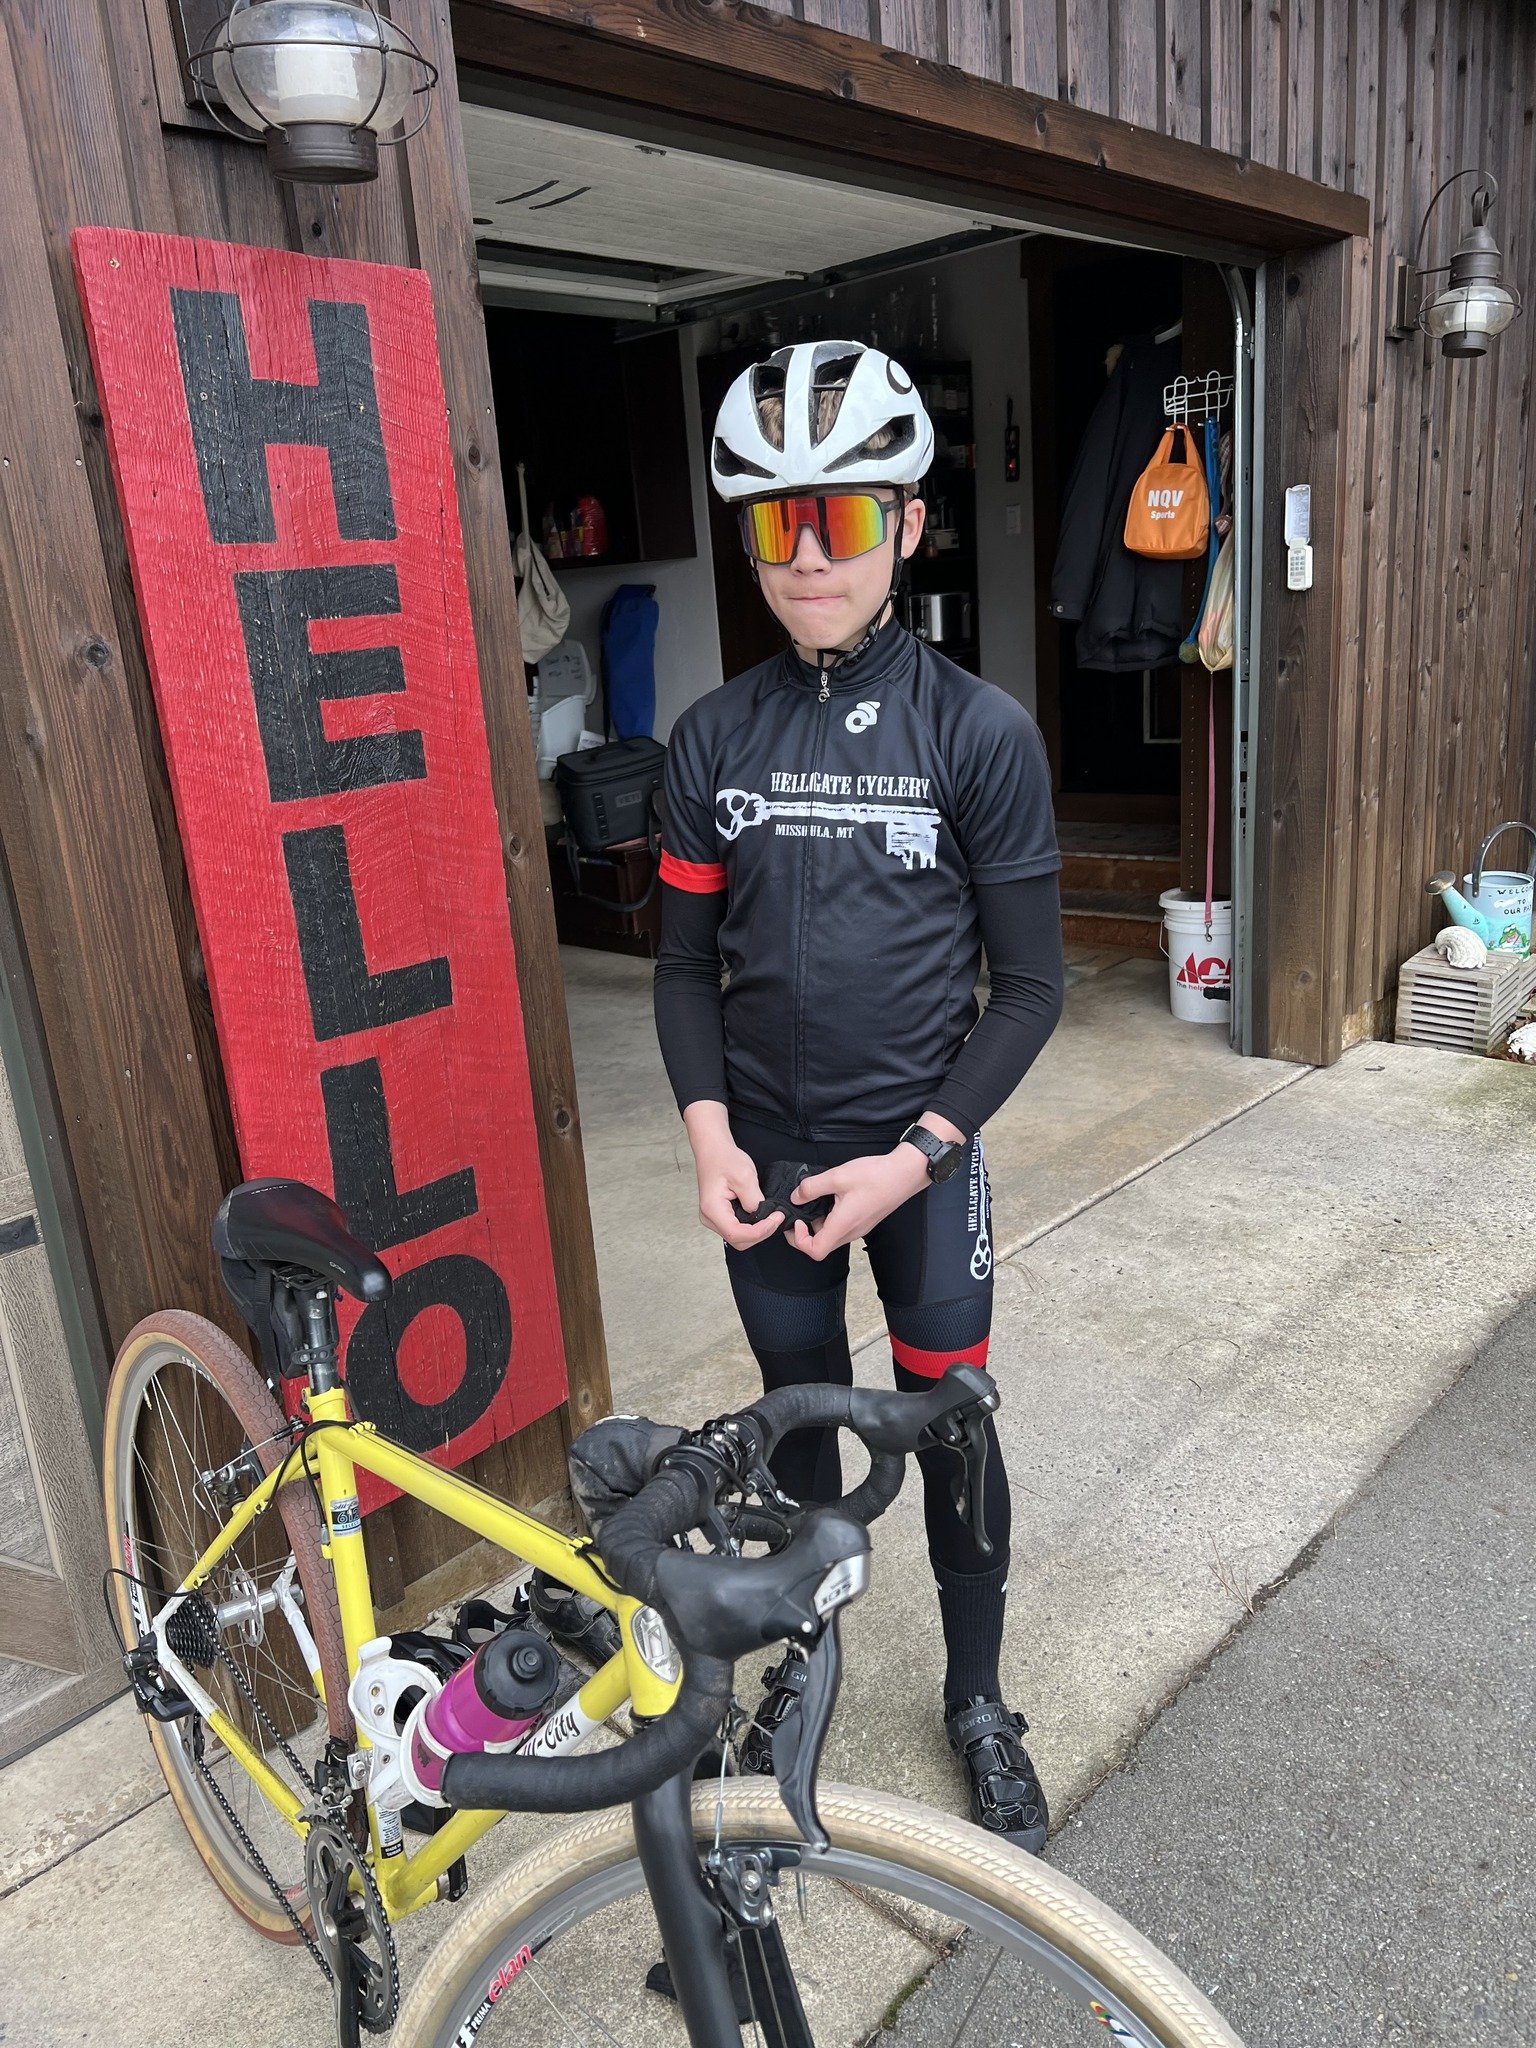 Hello Bud - Looking ready for spring rides in his Sendees 2.0 #morekidsonbikes #sunglassesstyle